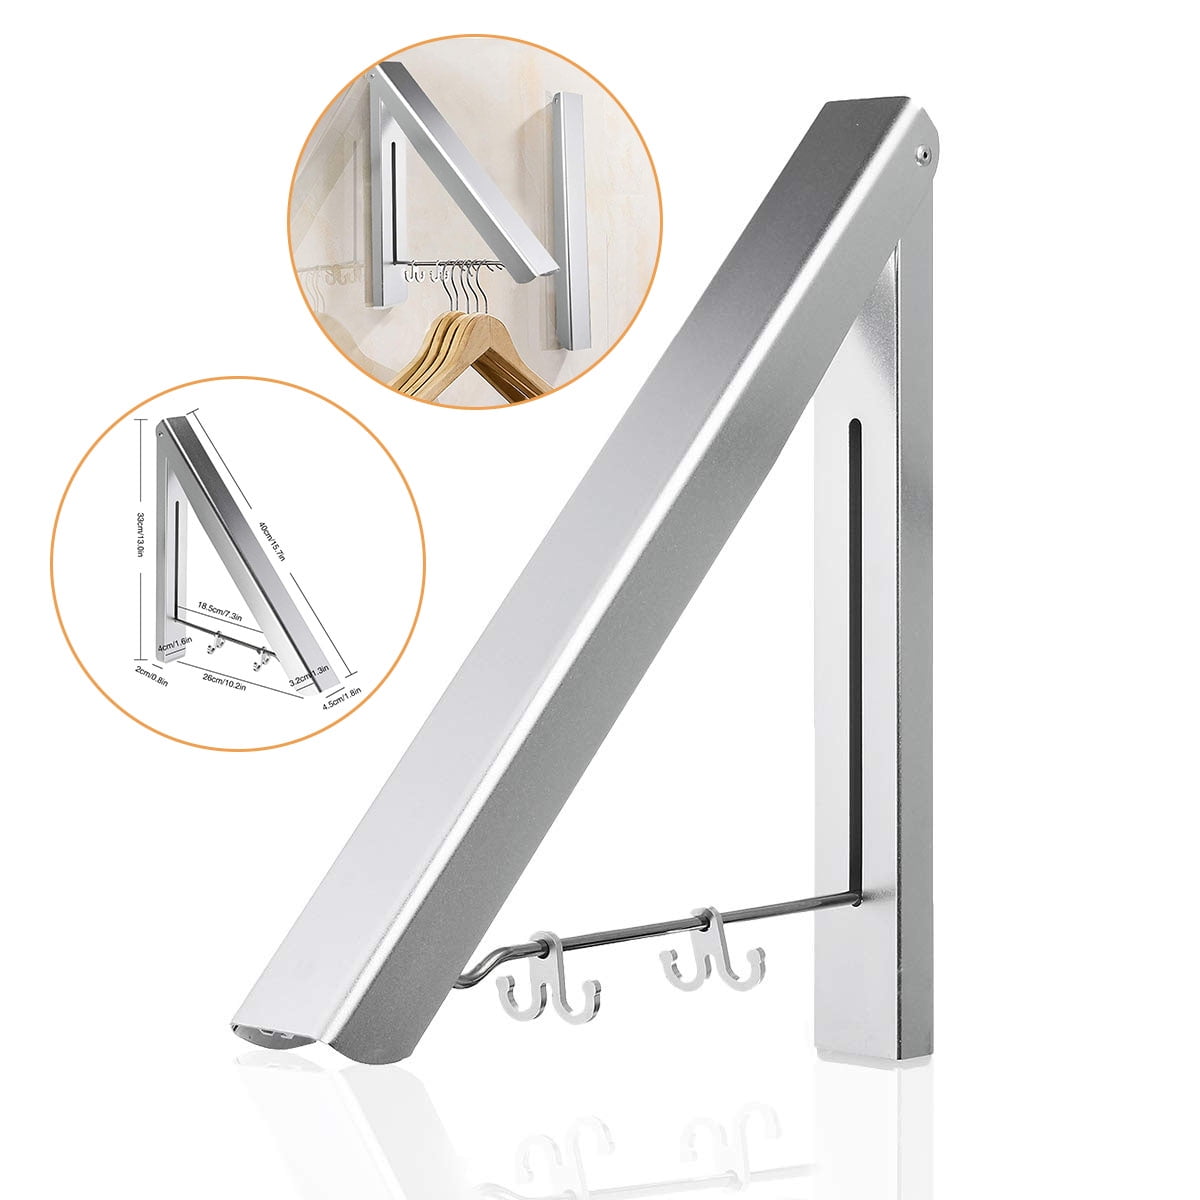 Folding Wall Mounted Drying Rack Clothes Hanger Space Coat Rack Hotel 